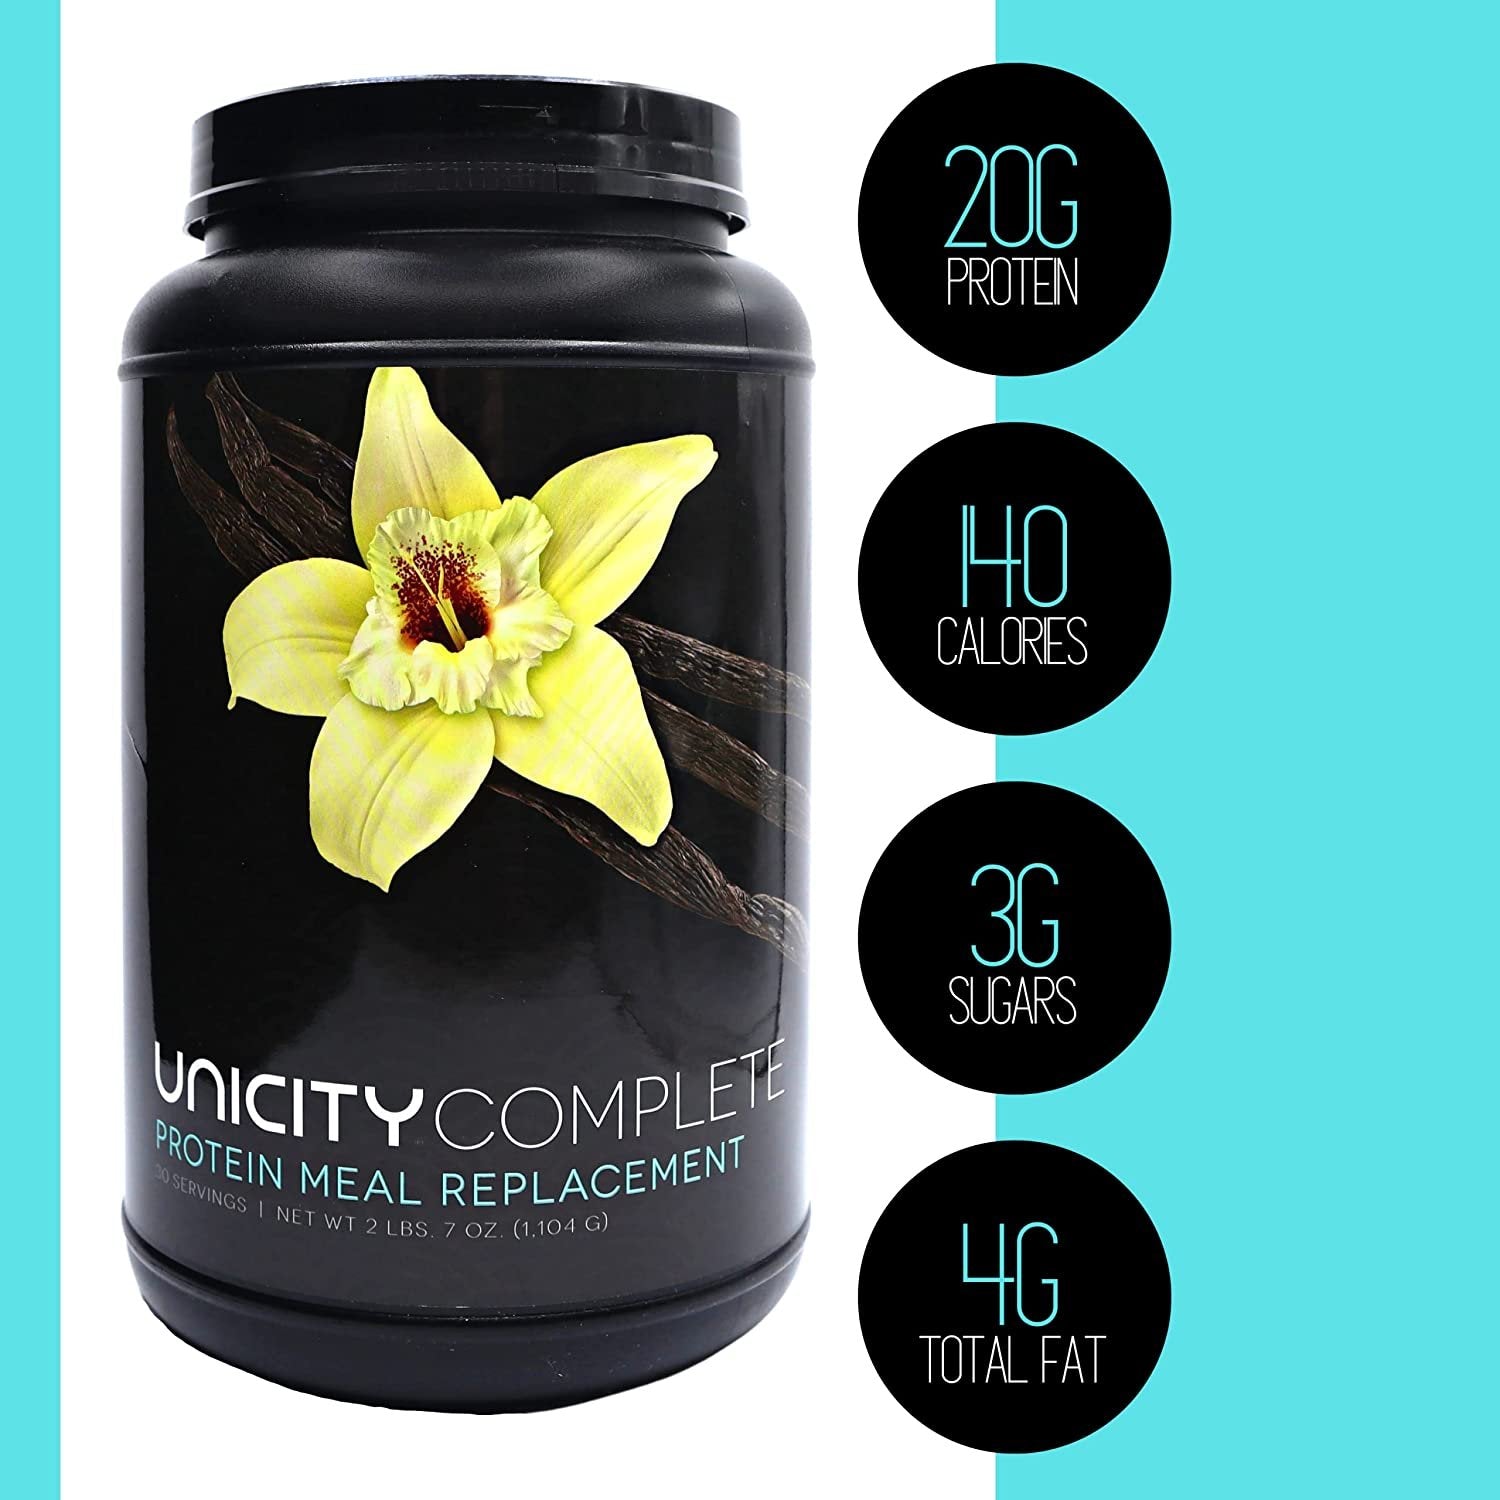 Unicity Complete Vanilla Protein Meal Replacement - Protein Shake Drink Mix with Stevia Extract - Gluten Free - Vanilla Flavored - 30 Servings (2 Lbs 7 Oz)